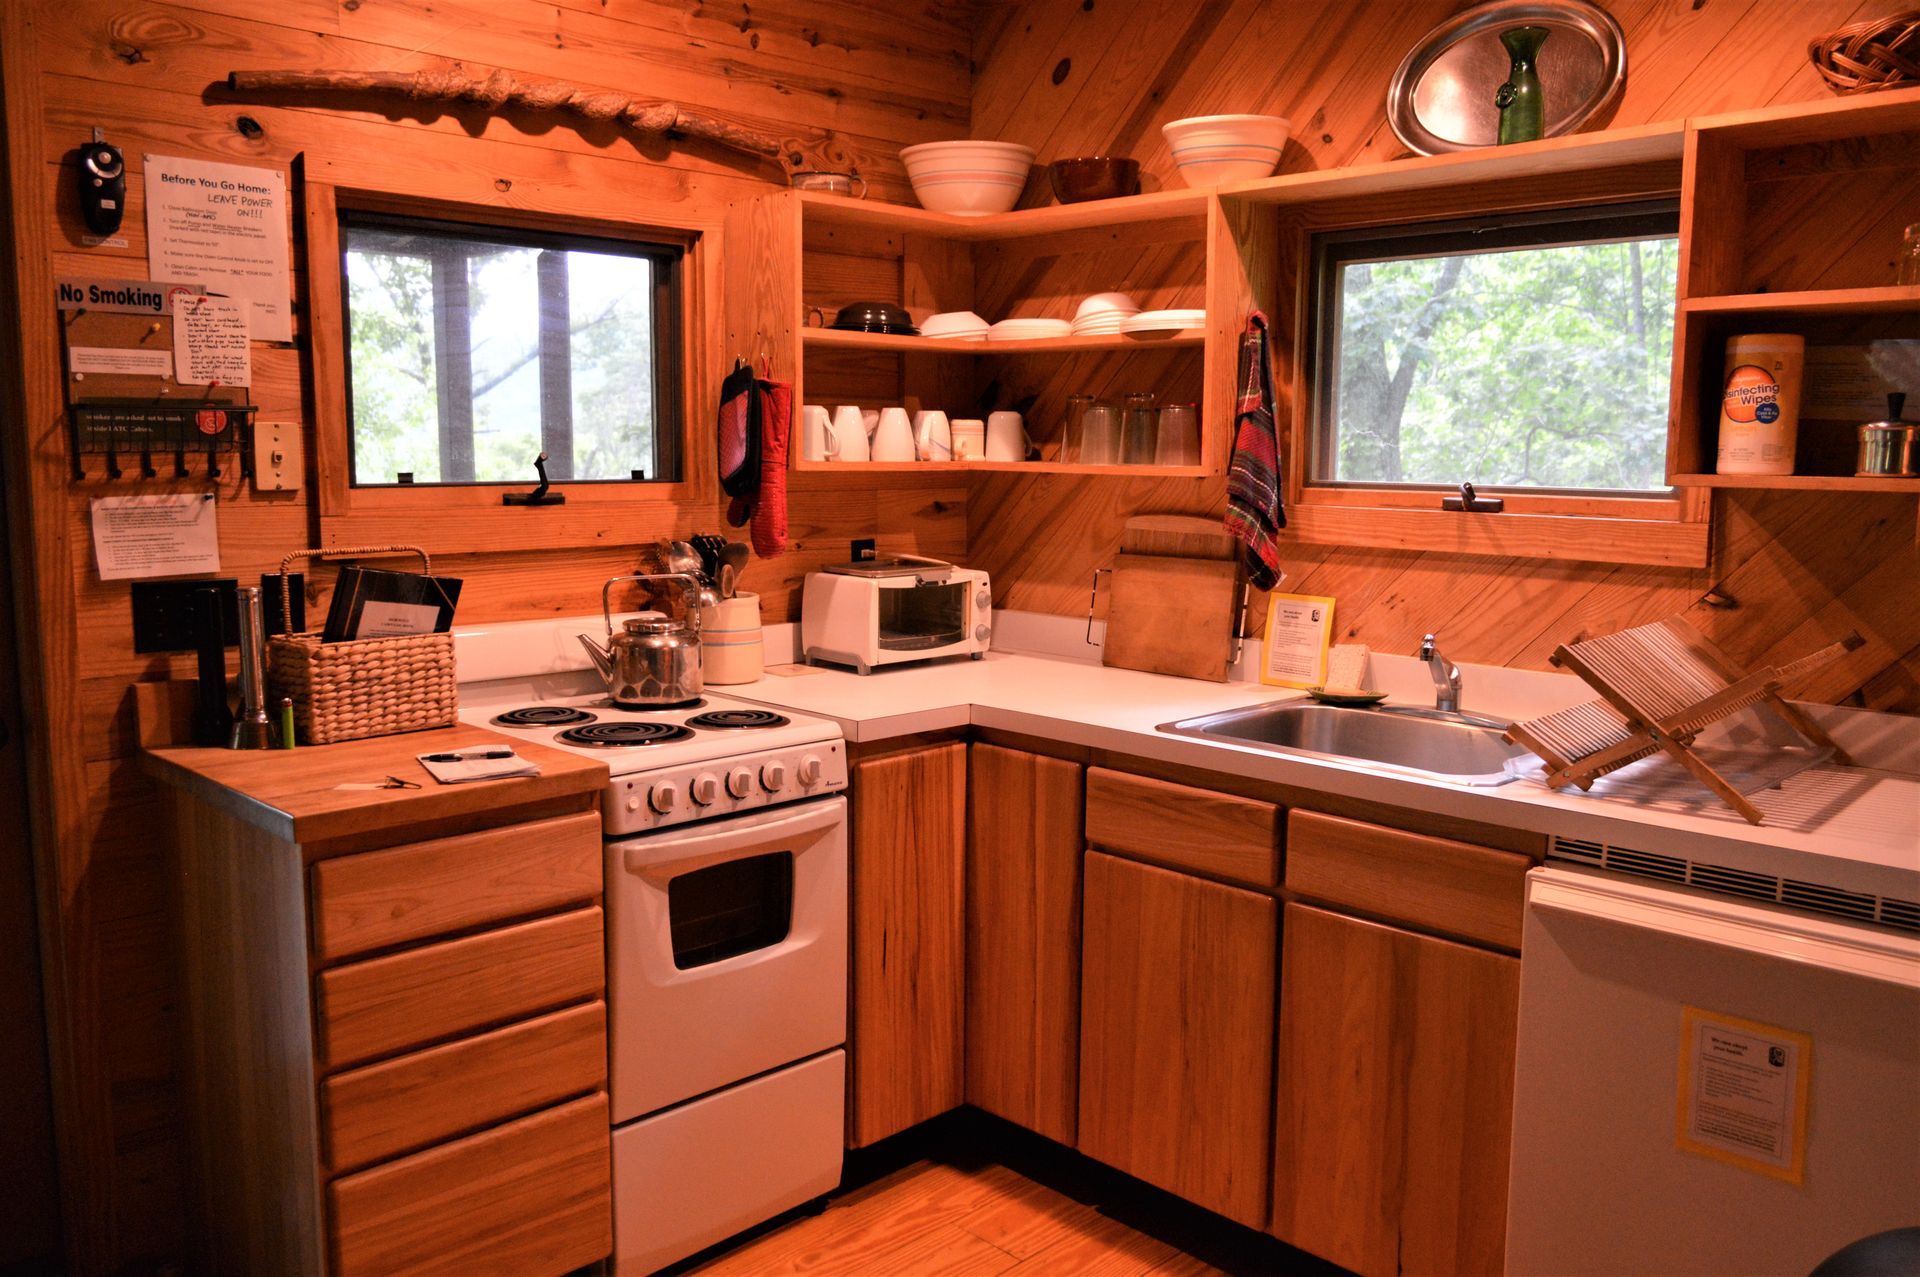 The kitchen of the Horwitz cabin showing a stovetop and oven, sink, and dishwasher.